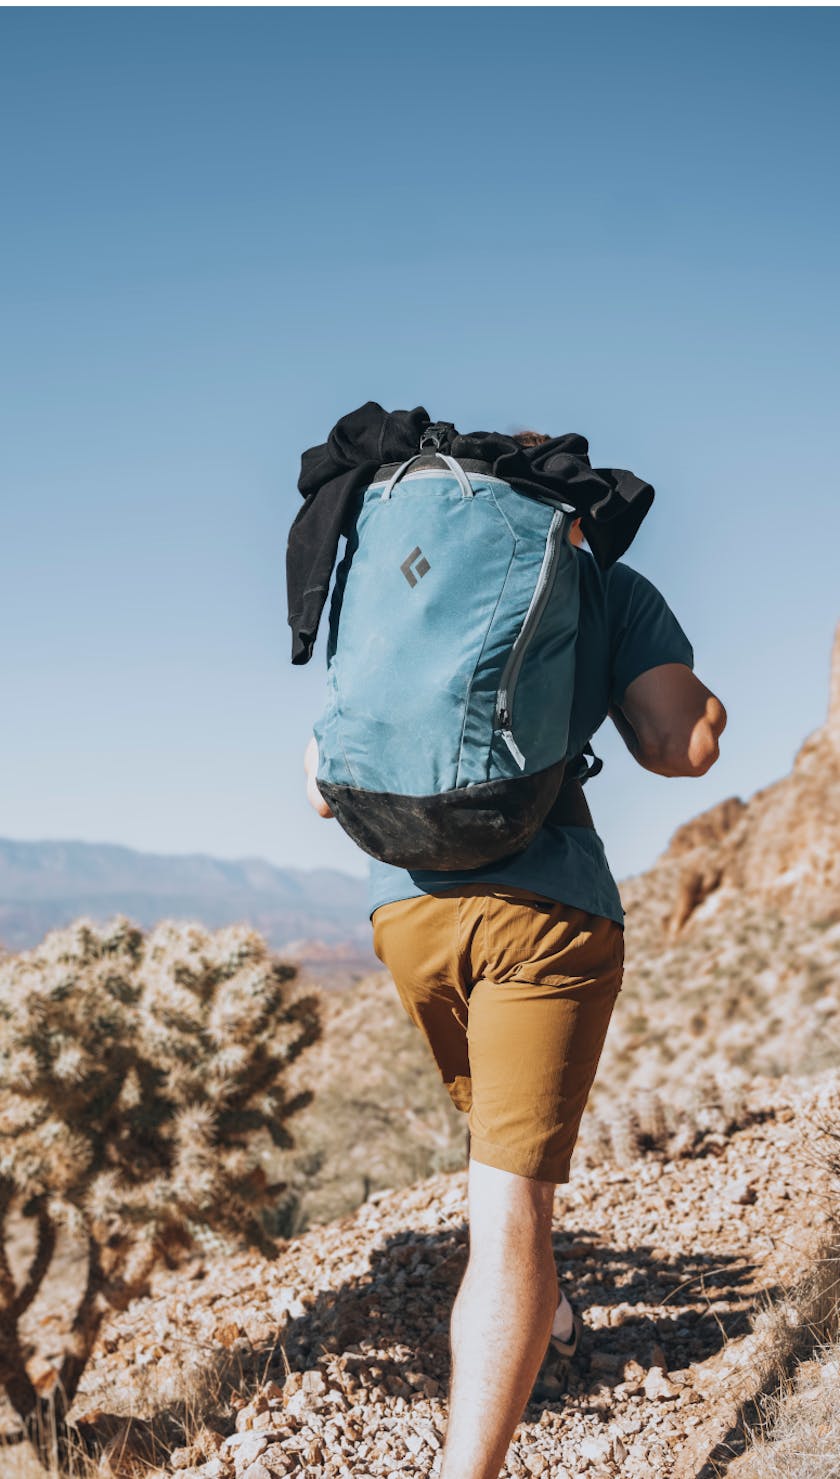 A man hiking with a backpack